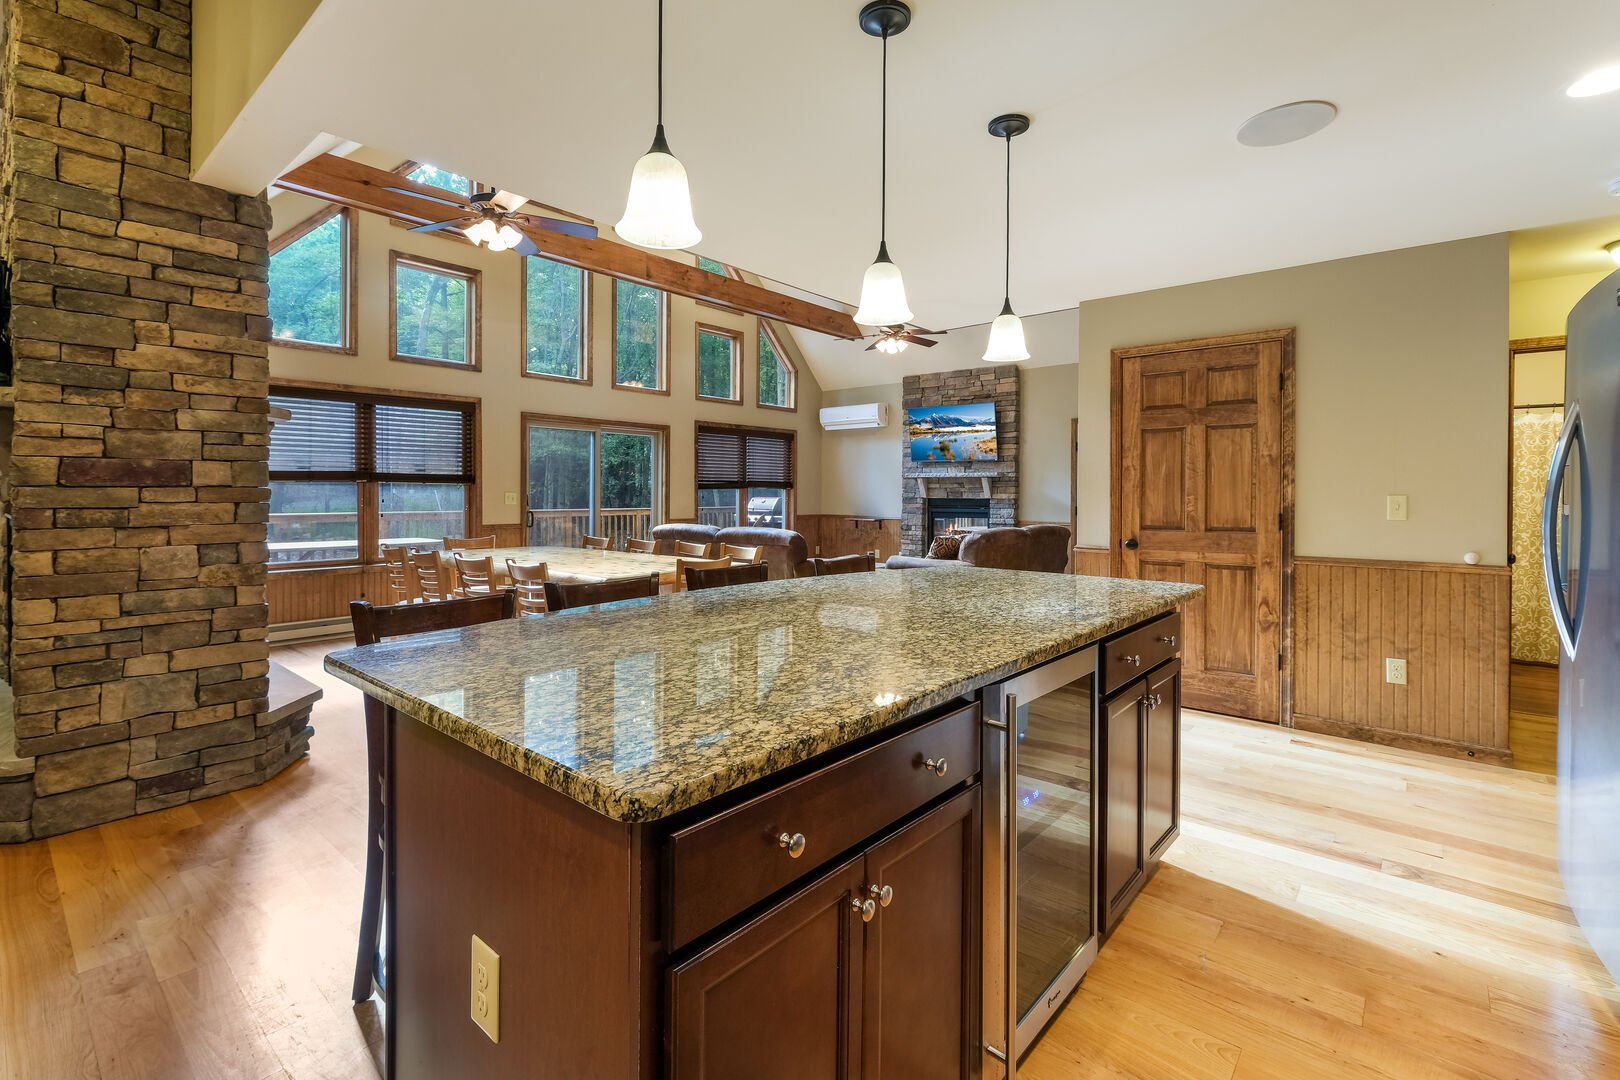 A picture of the granite counter-top kitchen island, facing the dining room and great room.